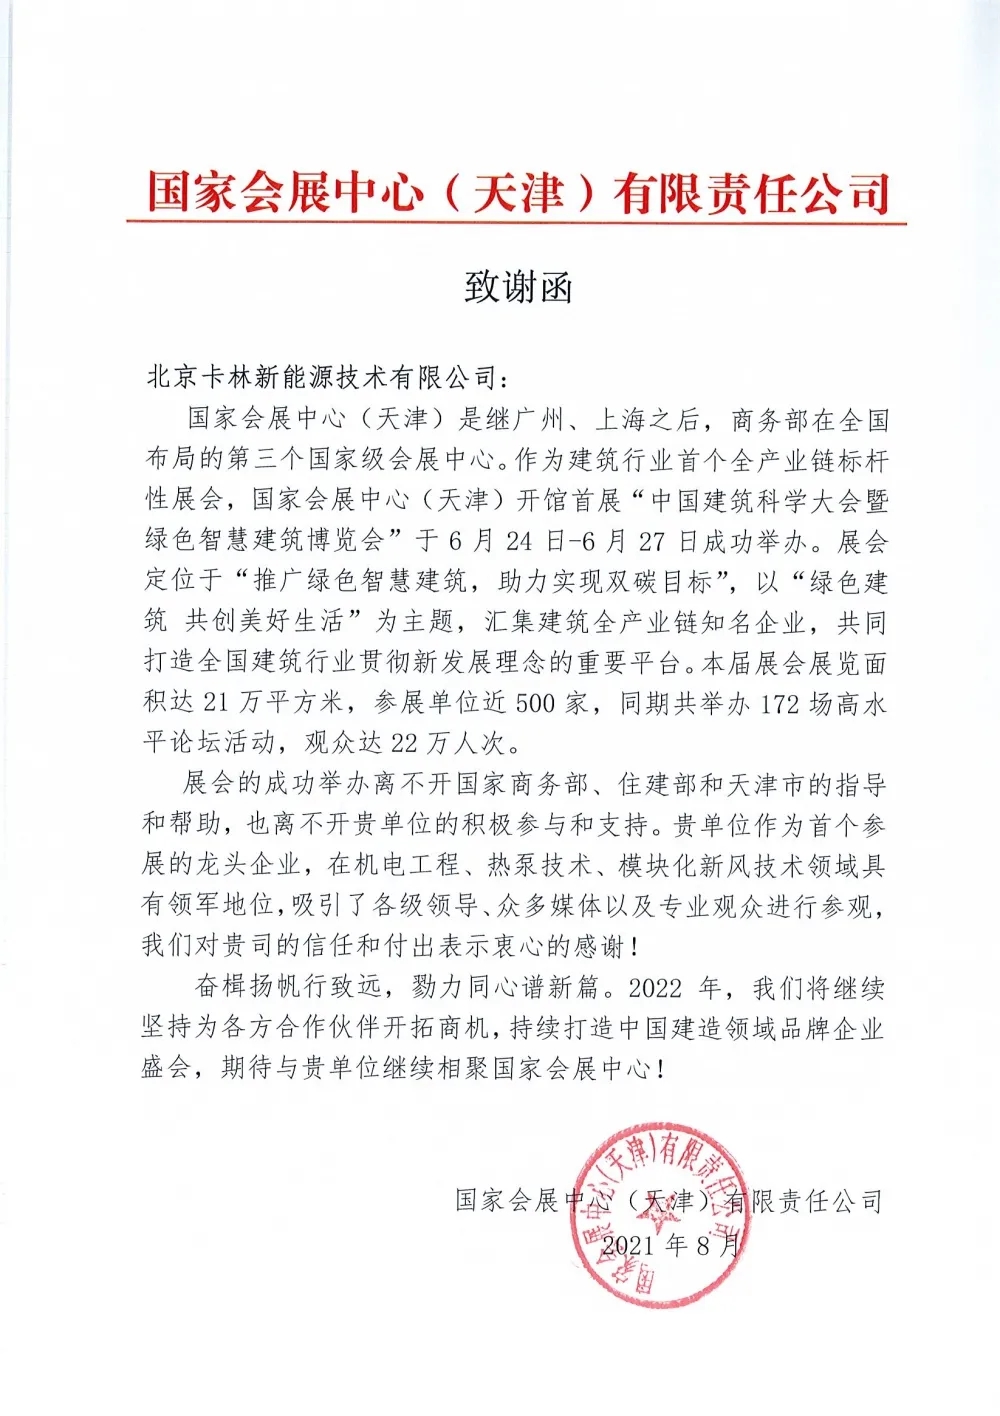 Letter of thanks from the National Convention and Exhibition Center (Tianjin)